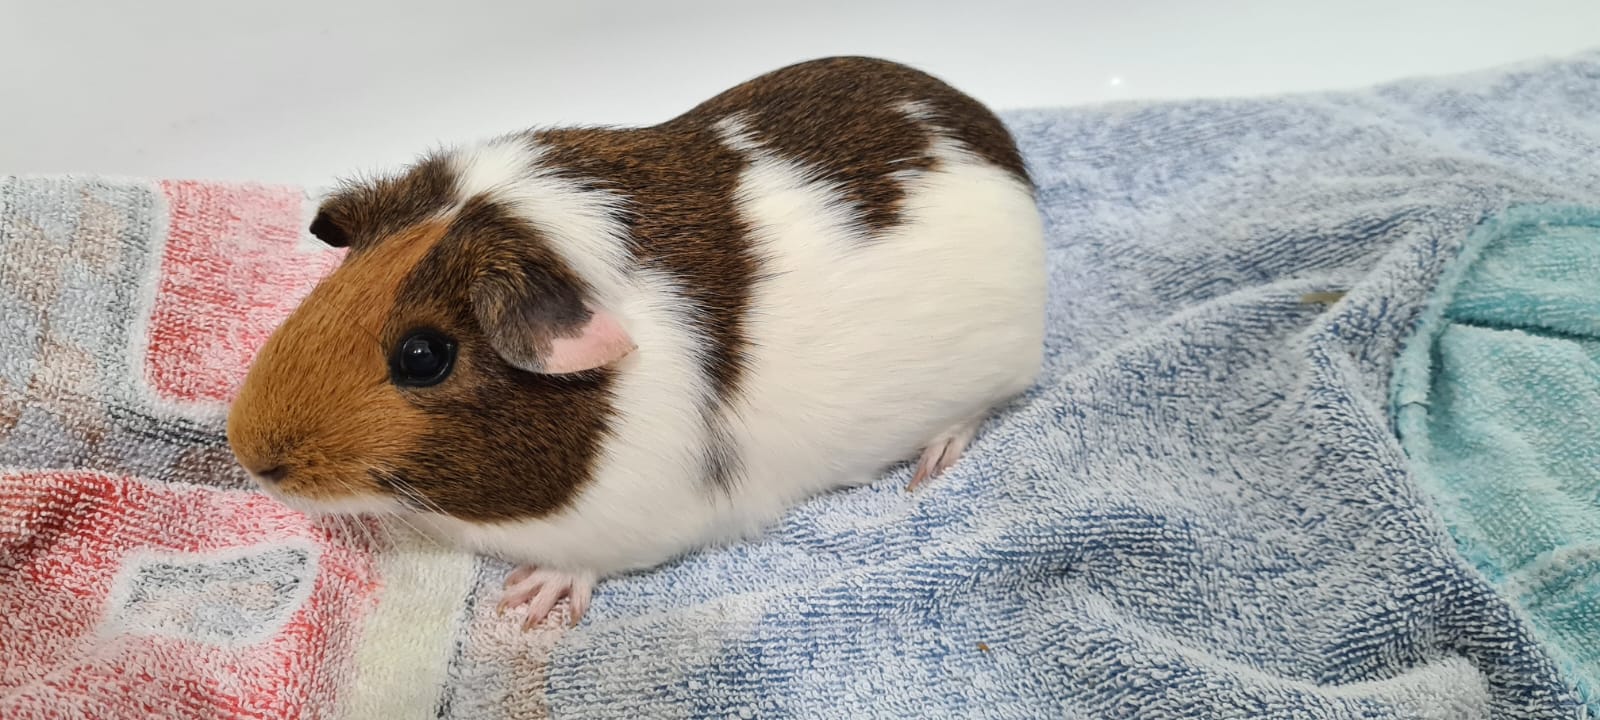 2 Healthy Female Guinea Pigs For Sale